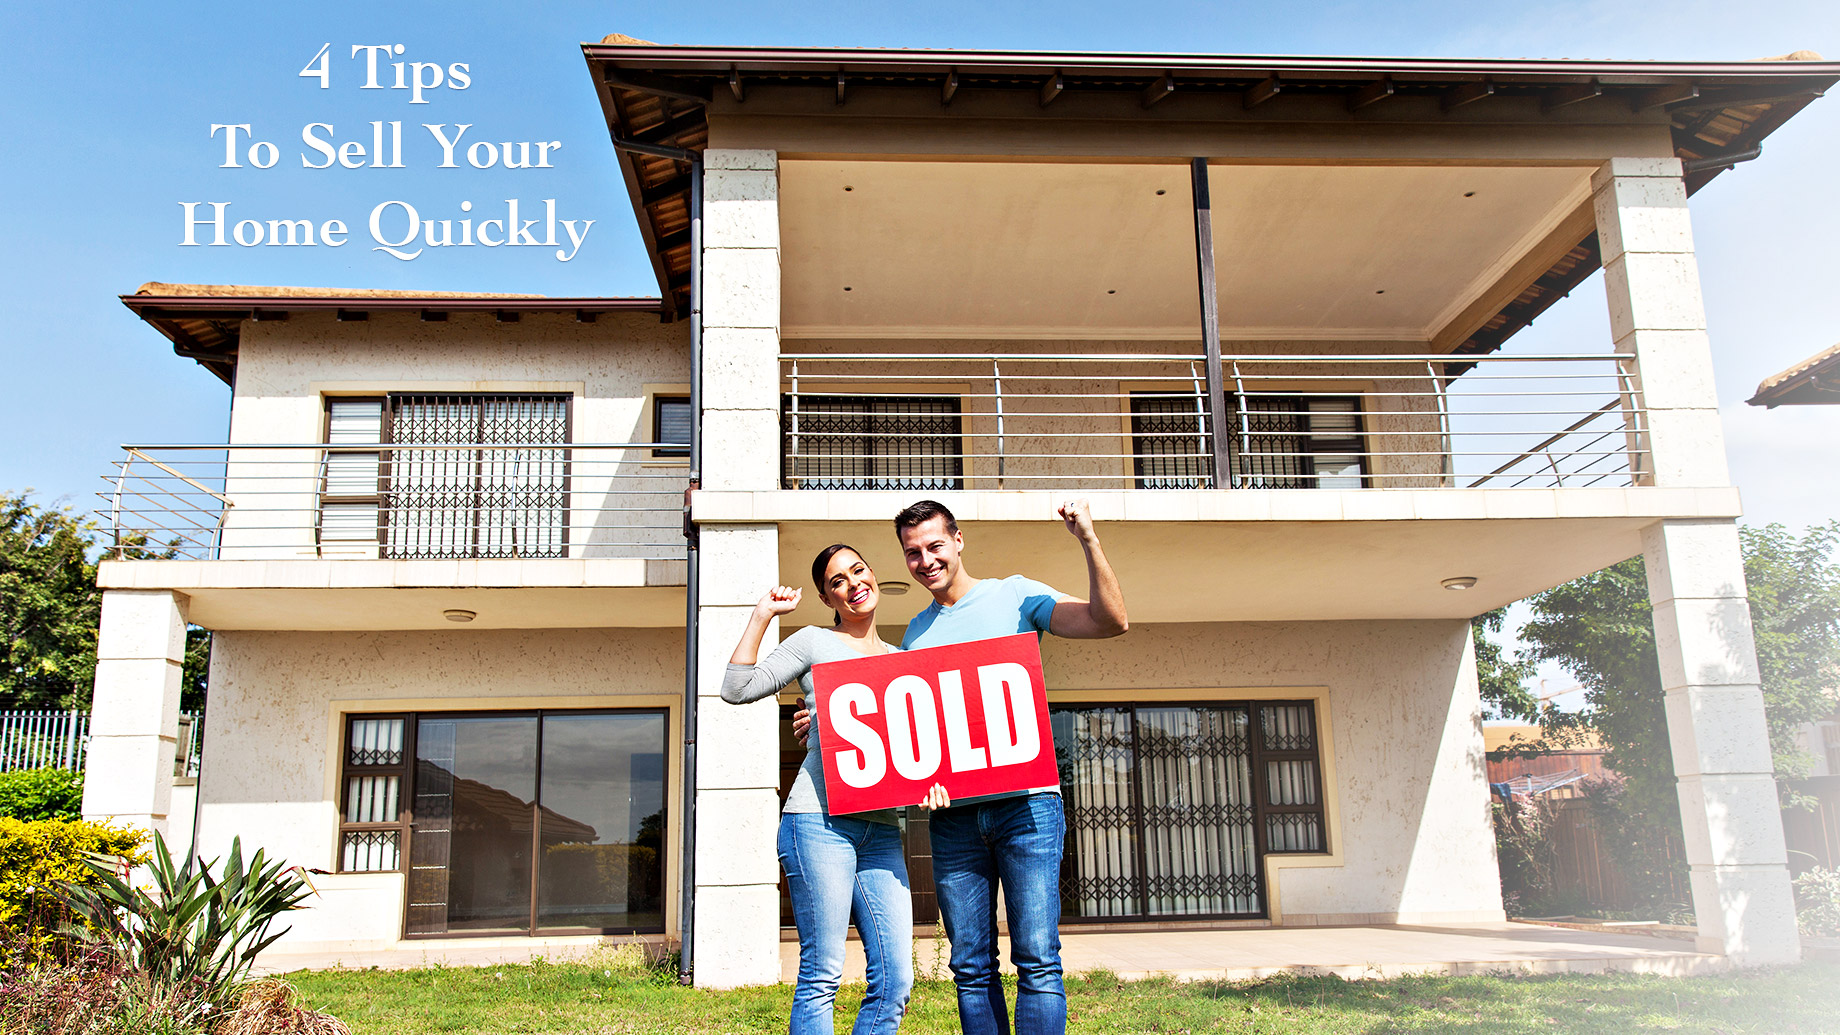 4 Tips To Sell Your Home Quickly